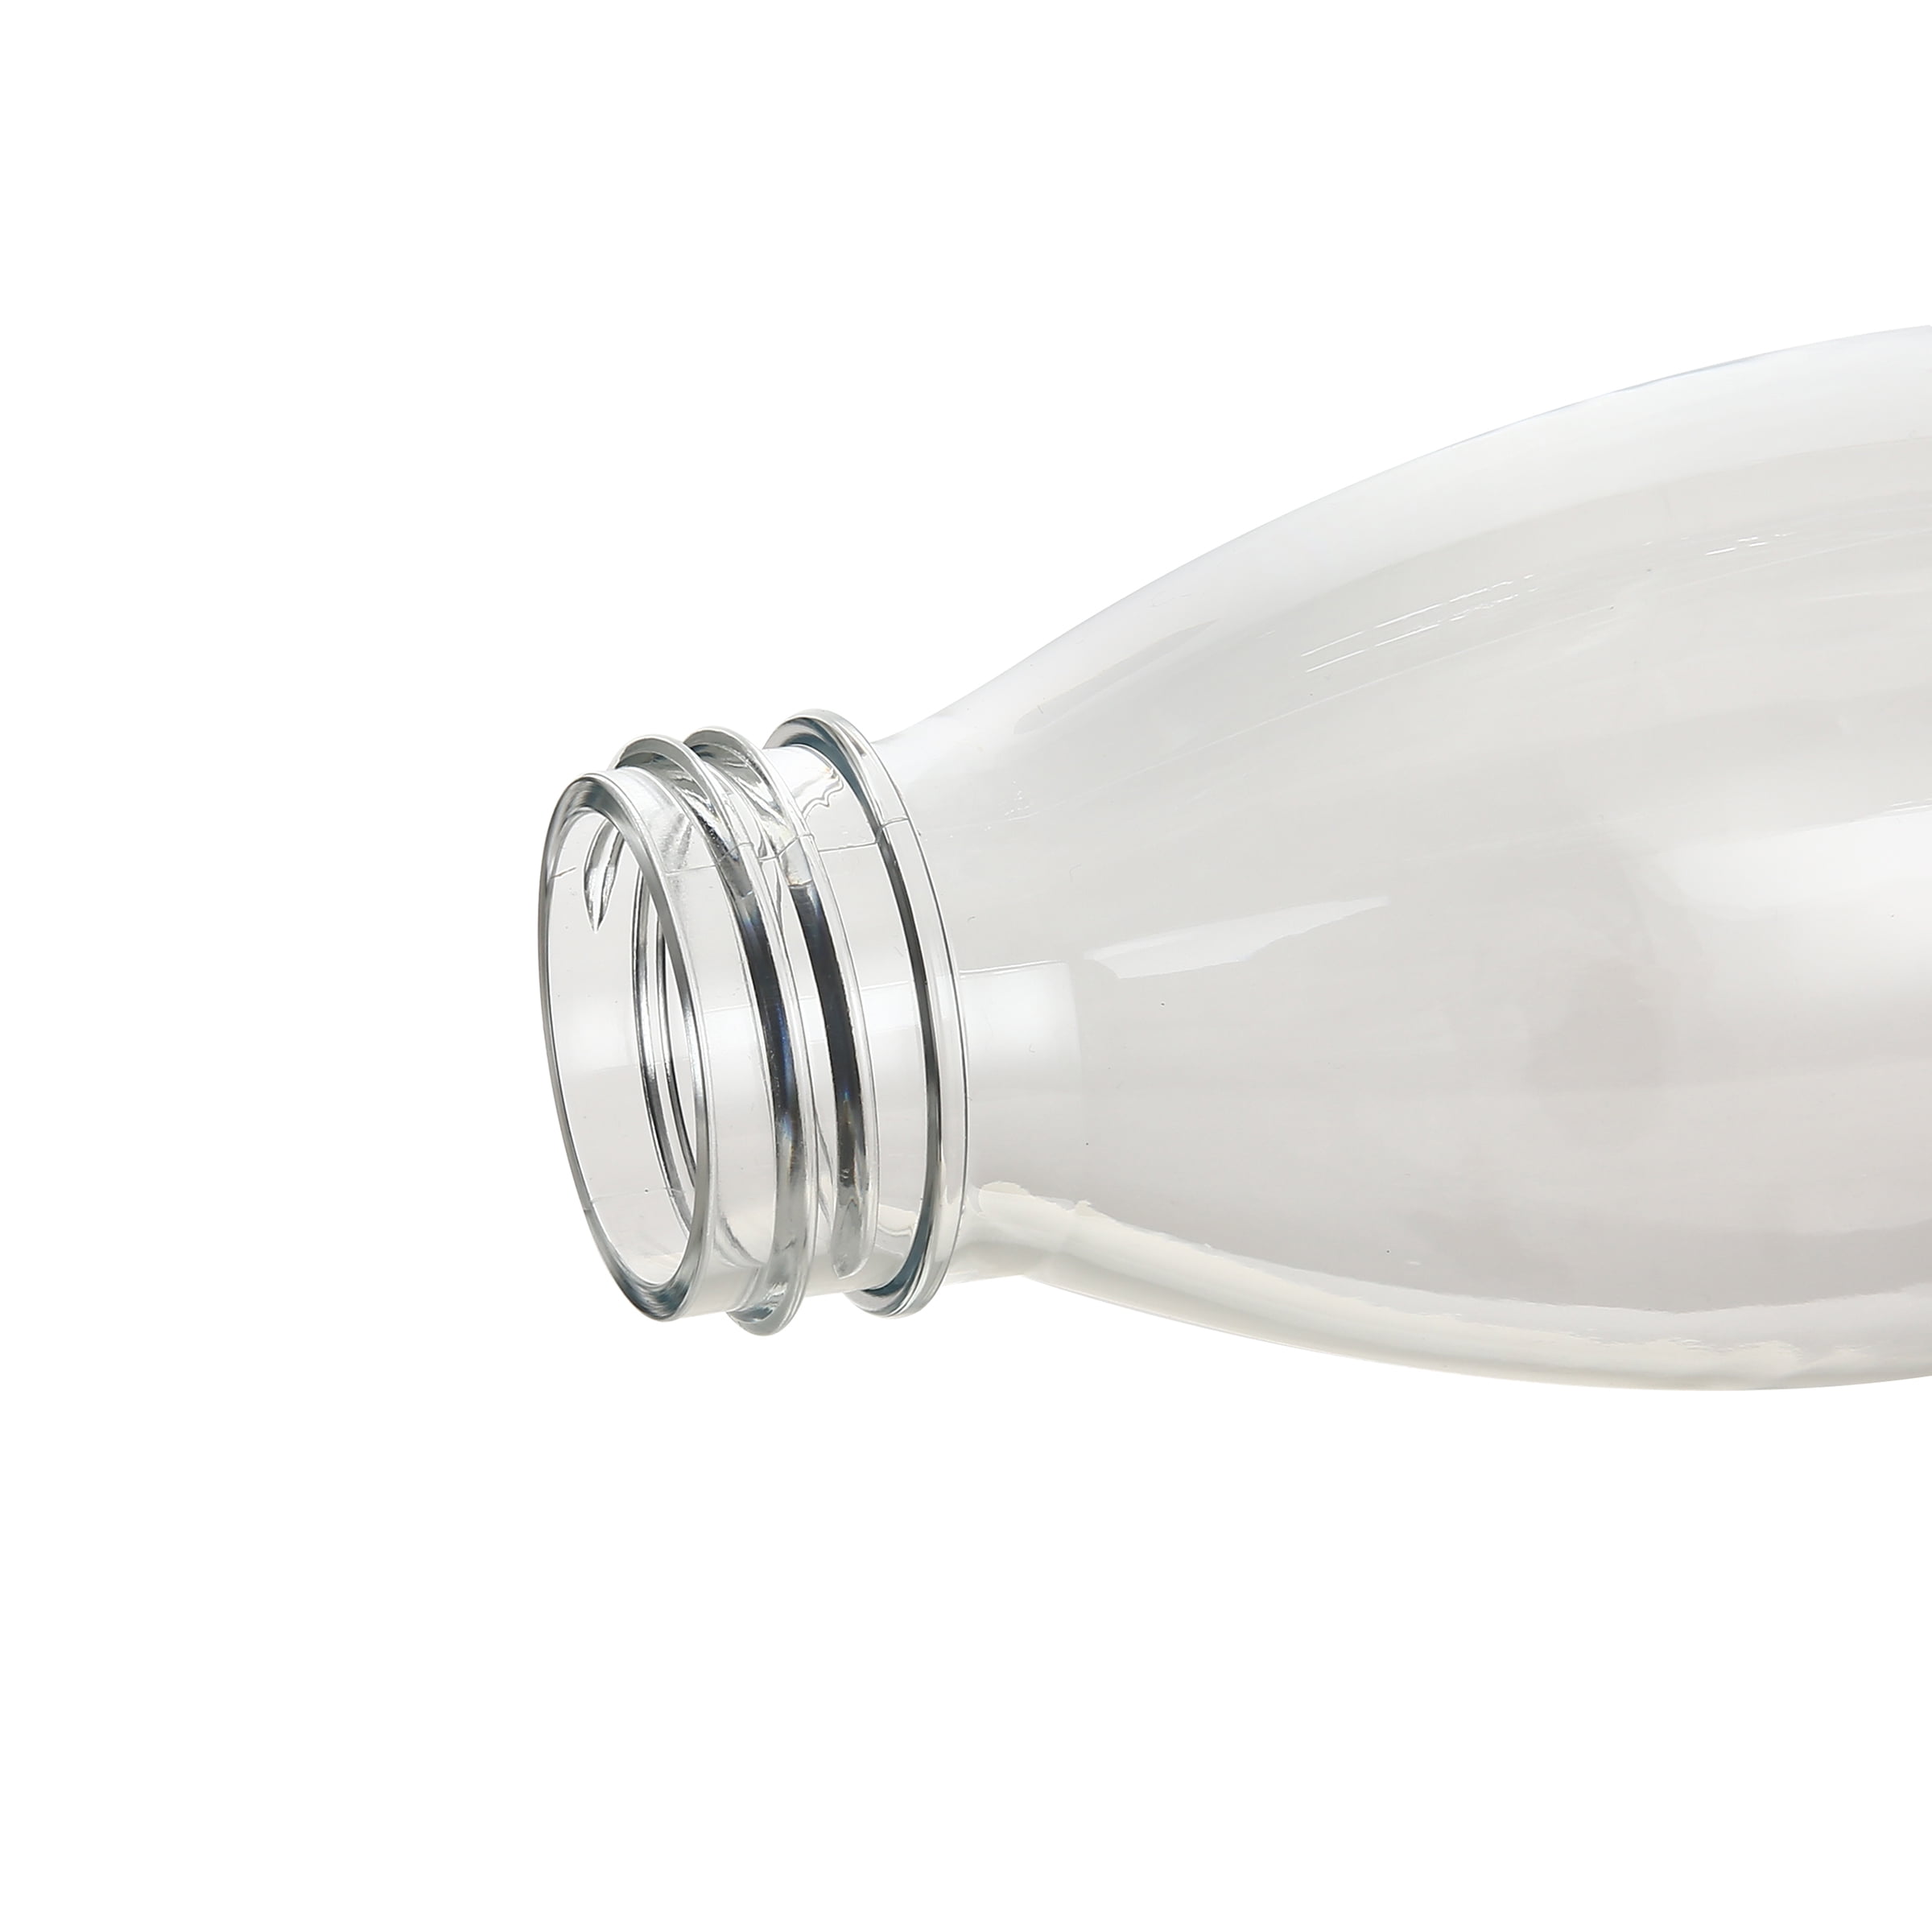 Mainstays 18 fl oz Plastic Clear Water Bottle with Stainless Steel Screw  Cap Lid and Strap